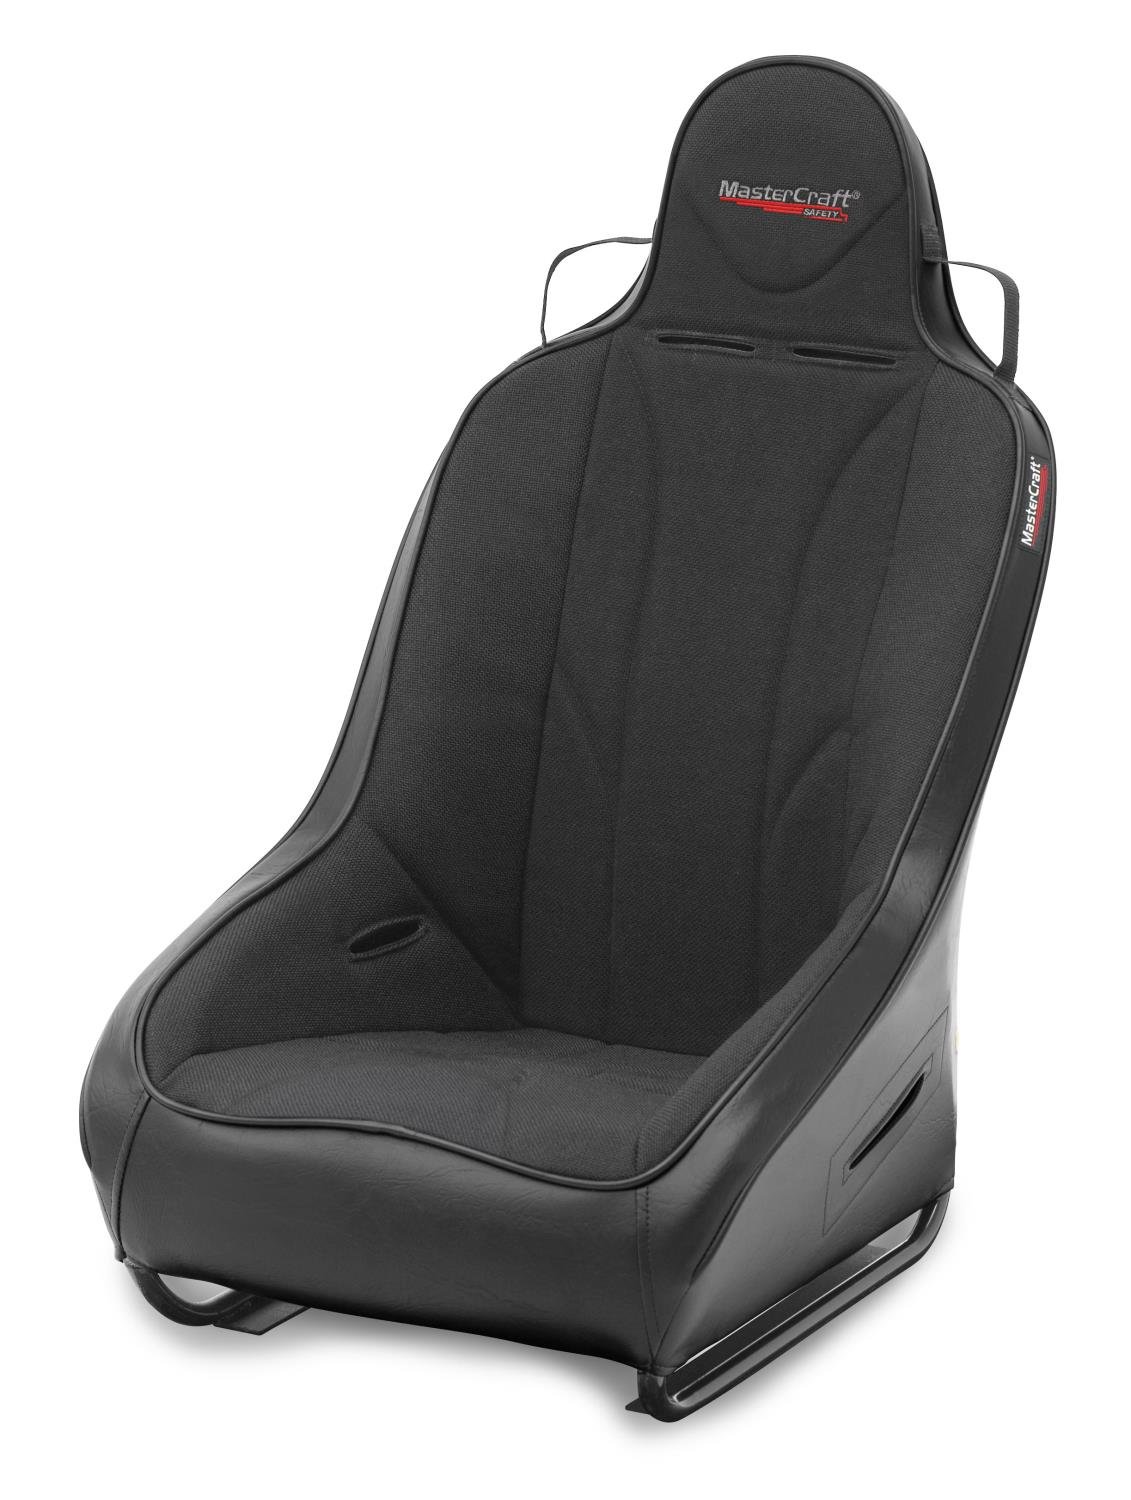 560014 Standard PROSeat w/Fixed Headrest, Black with Black Fabric Center and Black Side Panels, Black Band w/BRS Stitch Pattern